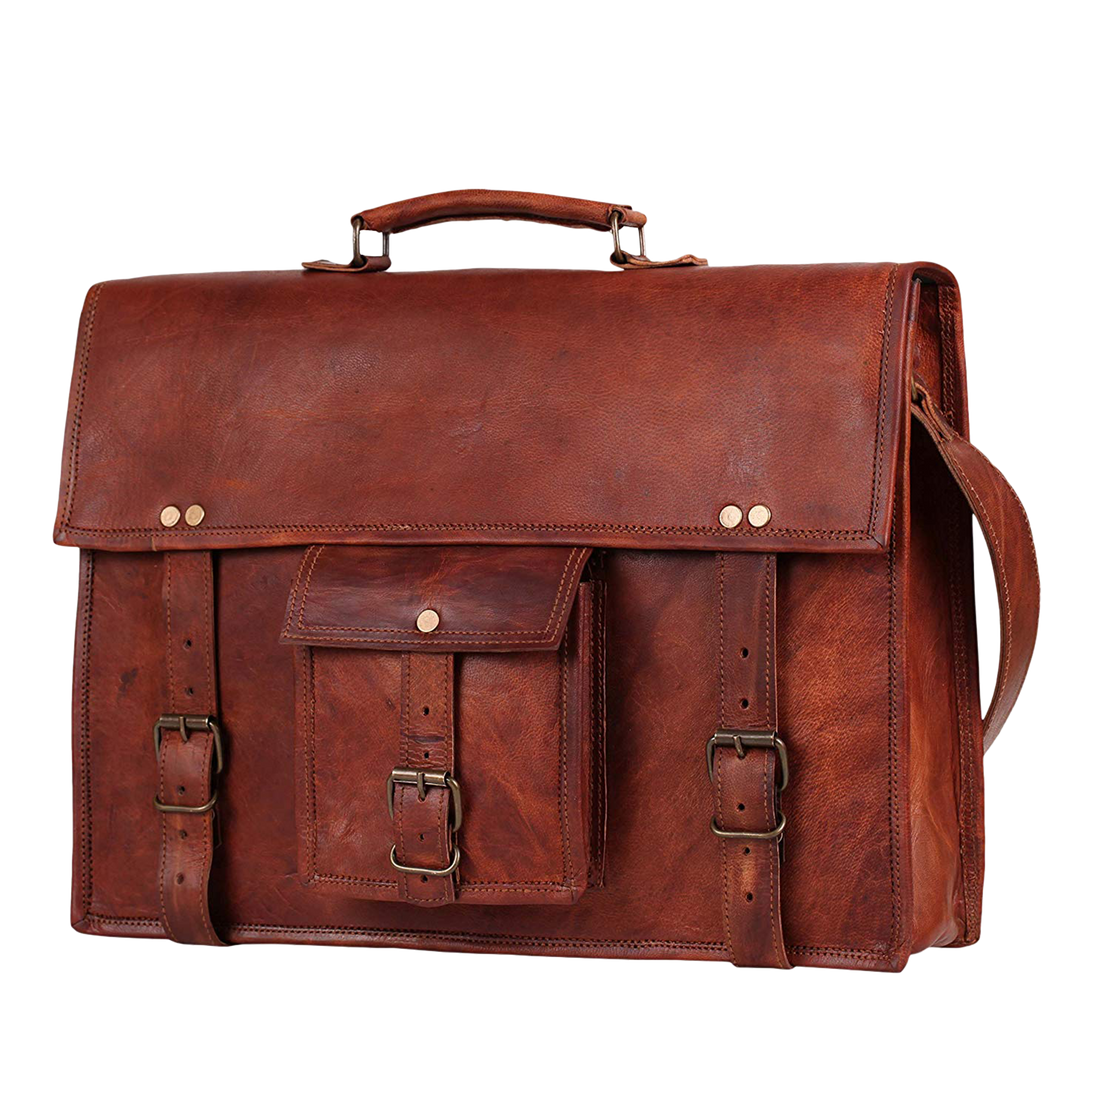 Beast 16" Leather Briefcase Classic Laptop Messenger Bag